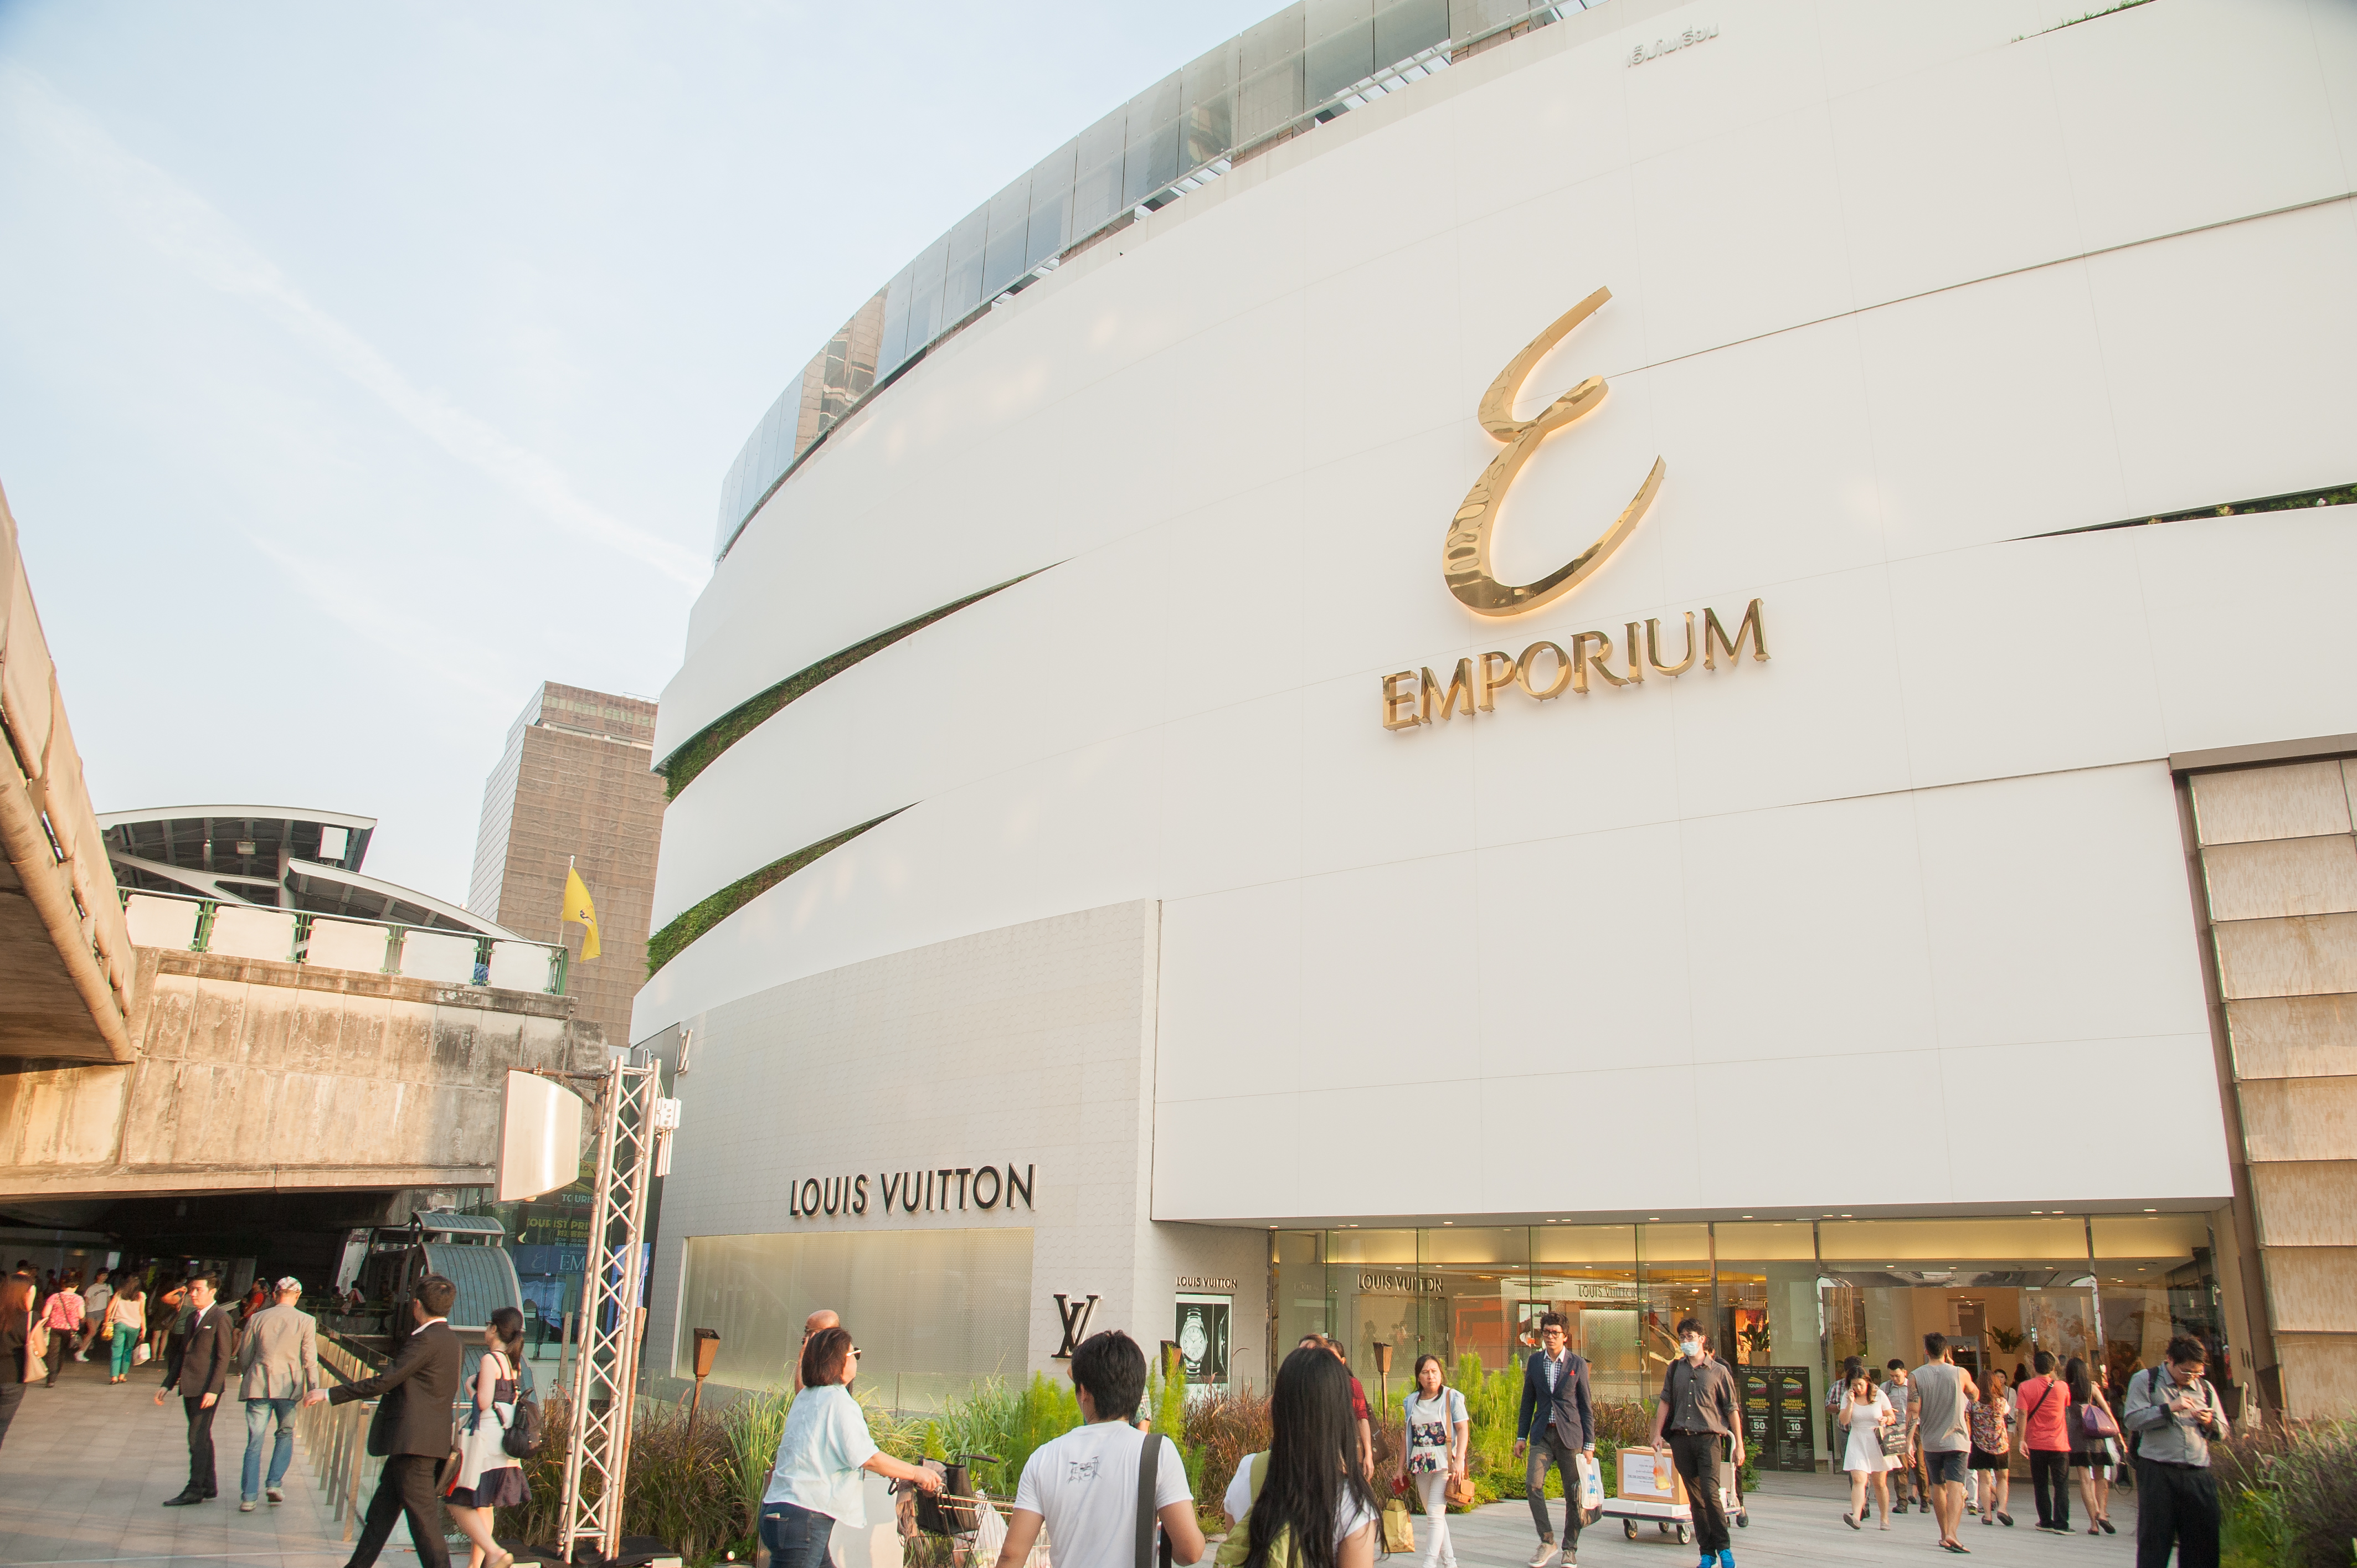 Emporium Bangkok is a sophisticated six-storey shopping centre in Sukhumvit, housing world-renowned designer brands, a luxurious cinema and state-of- the-art exhibition space, as well as a supermarket and food court. Emporium Bangkok is also incredibly convenient as it is directly connected to Phrom Phong BTS Skytrain Station.